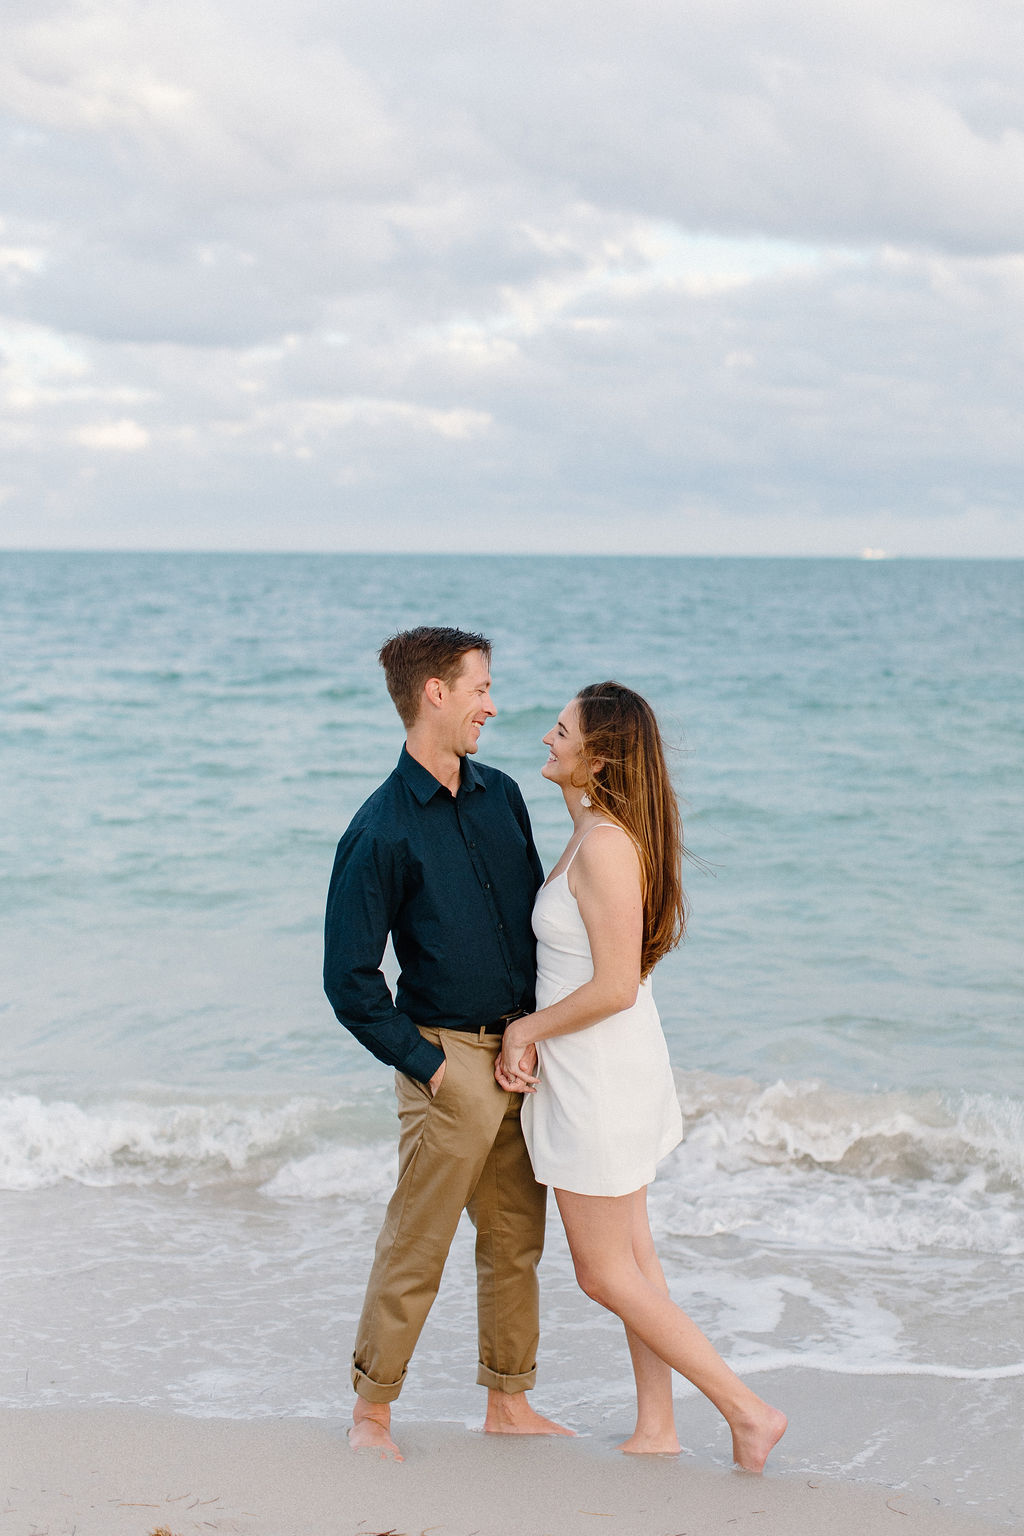 Bill Baggs State Park Engagement Pictures, Bill Baggs Engagement Photos, Miami Engagement Photographer, Engagement Photographer Miami, Erika Tuesta Photography